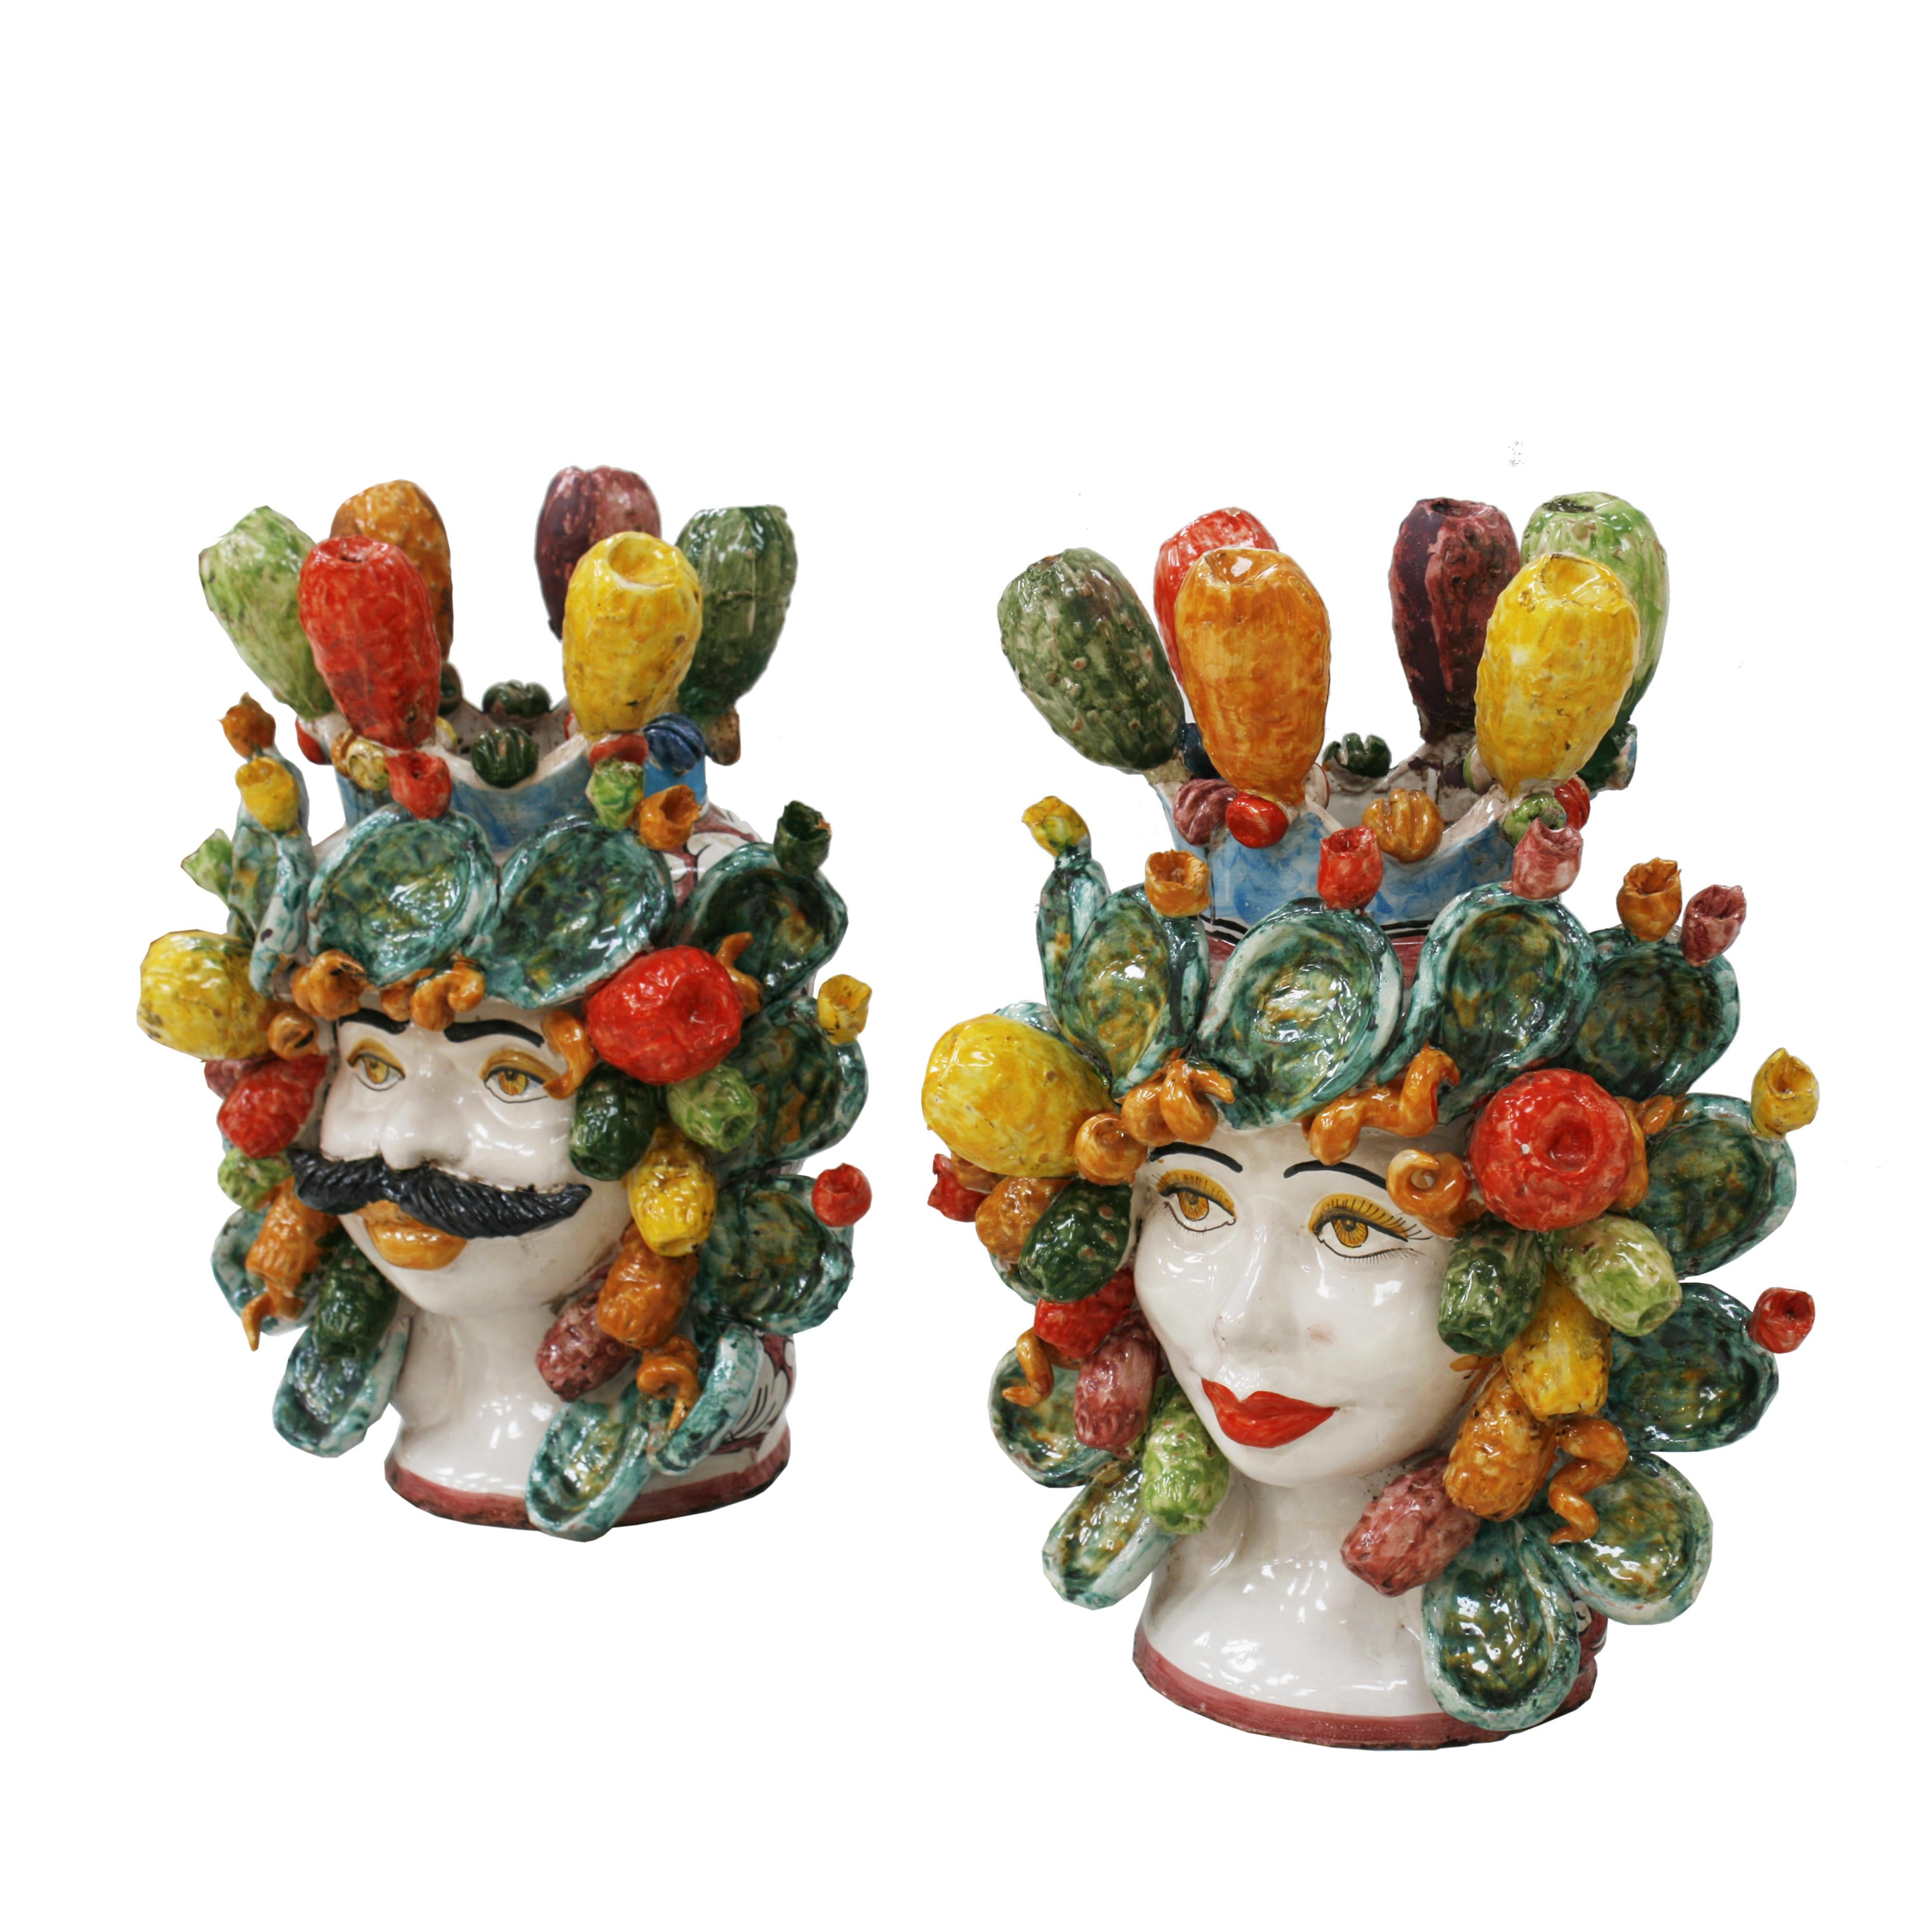 Pair of Sicilian vase with heads shape, hand painted made of colored terracotta ceramic, Italy. It is completely handmade following the ancient Italian and Sicilian tradition to turn and paint the ceramic by hand.

Sicily is famous for its ceramic